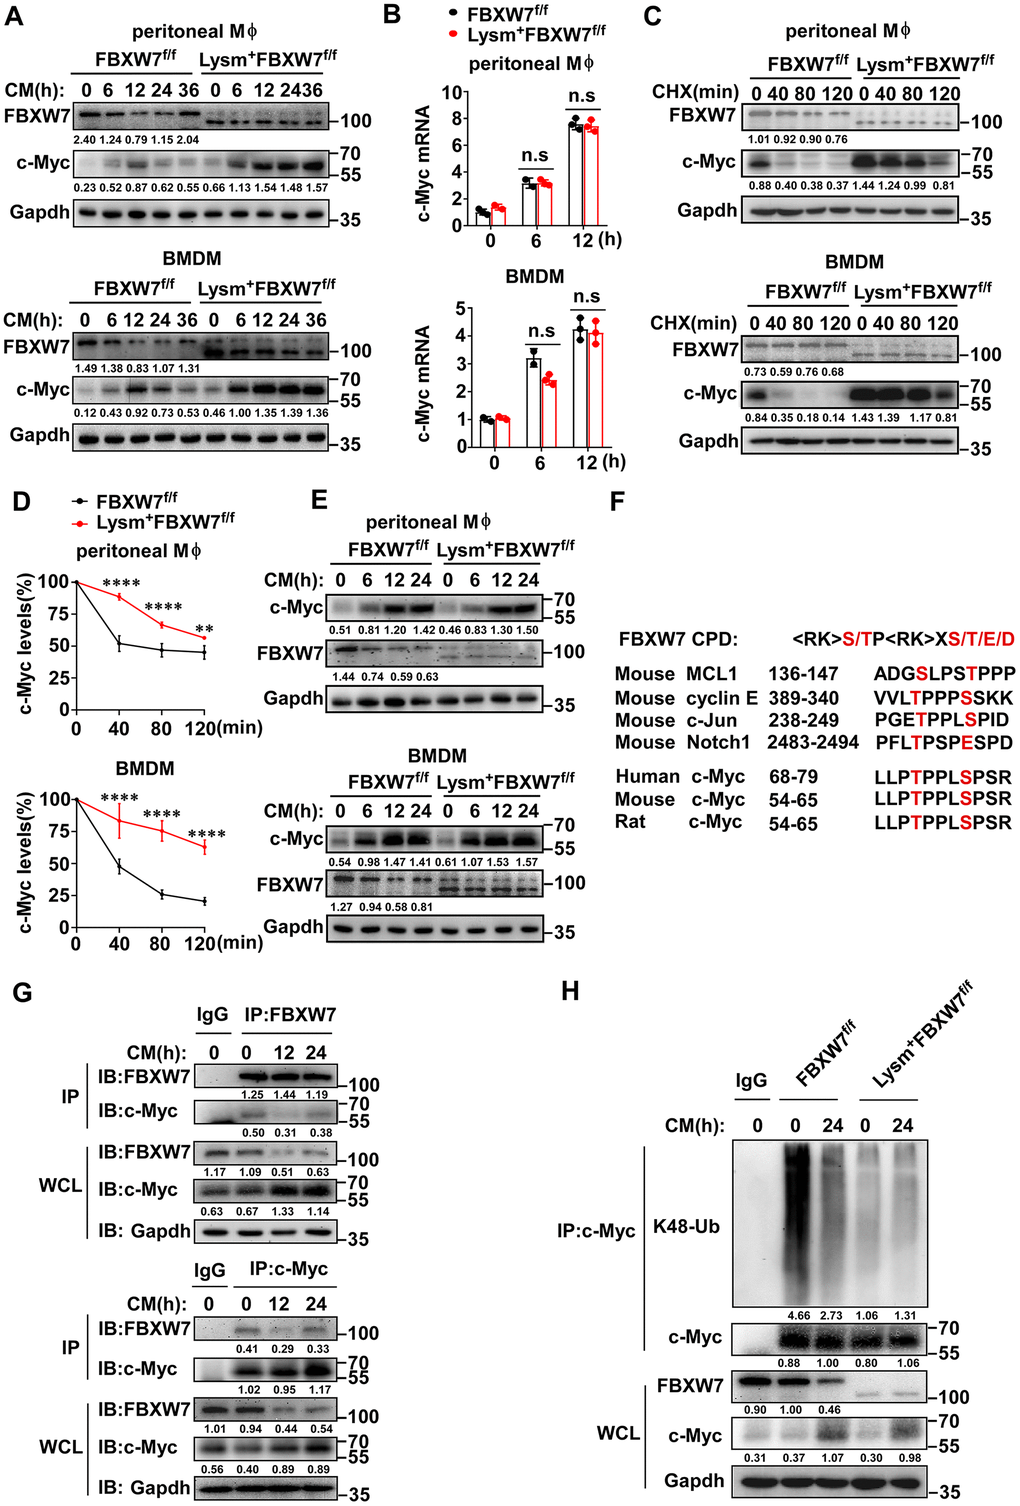 FBXW7 mediates degradation and ubiquitination of c-Myc in M2-like TAMs. (A) The protein expression of c-Myc and FBXW7 in wild-type and FBXW7-knockout primary macrophages stimulated with conditioned medium were measured by immunoblotting. (B) qRT-PCR analysis of c-Myc mRNA expression in wild-type and FBXW7-knockout primary macrophages after conditioned medium treatment. (C) Immunoblot analysis of c-Myc and FBXW7 in wild-type and FBXW7-knockout primary macrophages treated with CHX (20 μg/mL) for the indicated time period after conditioned medium pre-treatment. (D) The quantification of relative c-Myc levels in (C). (E) The protein expression of c-Myc and FBXW7 in wild-type and FBXW7-knockout primary macrophages after treatment with MG132 (10 μM) and conditioned medium. (F) The phosphodegron sequence alignment of c-Myc recognized by FBXW7 with MCL1, cyclin E, Notch1, and c-Jun. The FBXW7 phosphodegron sequence present in c-Myc is conserved across different species. Conserved residues within the degron sequences are shown in red. (G) Immunoblot analysis of BMDMs stimulated with conditioned medium for the indicated time periods and treated with MG132, followed by immunoprecipitation with specific antibody-conjugated agarose or immunoglobulin G (IgG)-conjugated agarose. (H) Immunoblot analysis of the K48 ubiquitination of c-Myc in wild-type and FBXW7-knockout BMDMs stimulated with conditioned medium. Data are shown as the mean ± SD and are representative of three independent experiments. *P P P P B, D)).